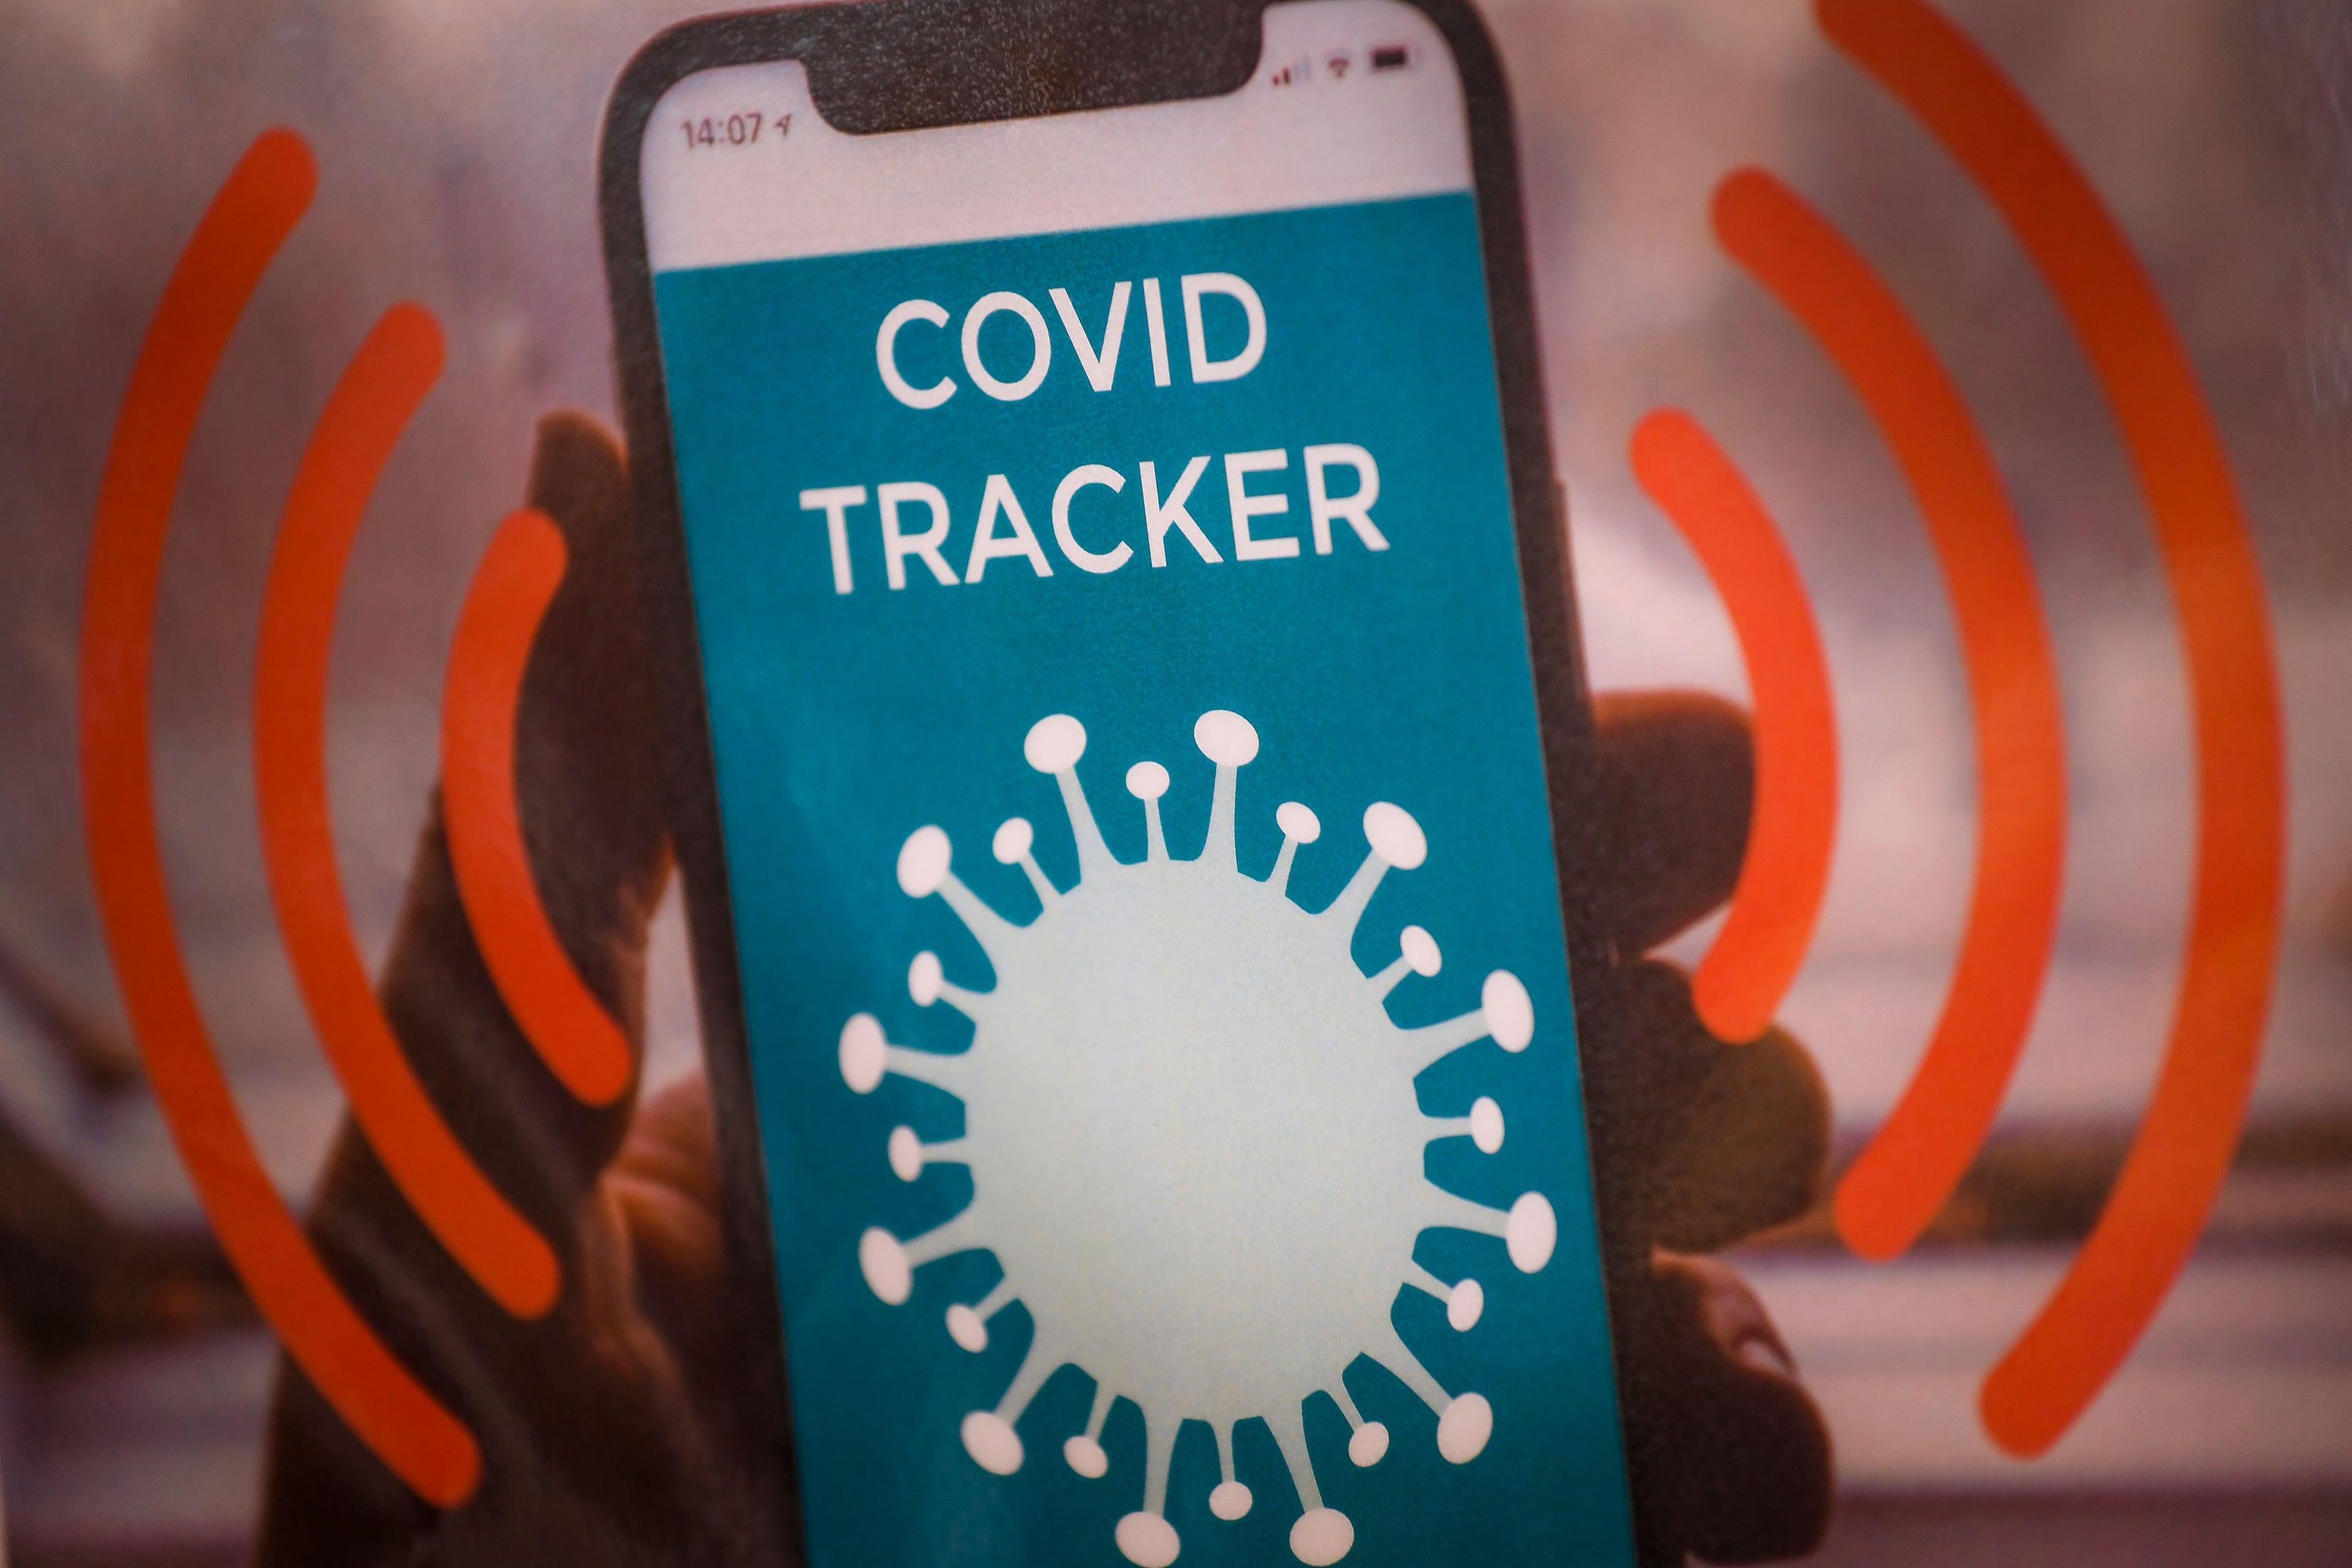 An iPhone with the words "COVID TRACKER" is held in a hand, with red stylized waves coming off the phone.